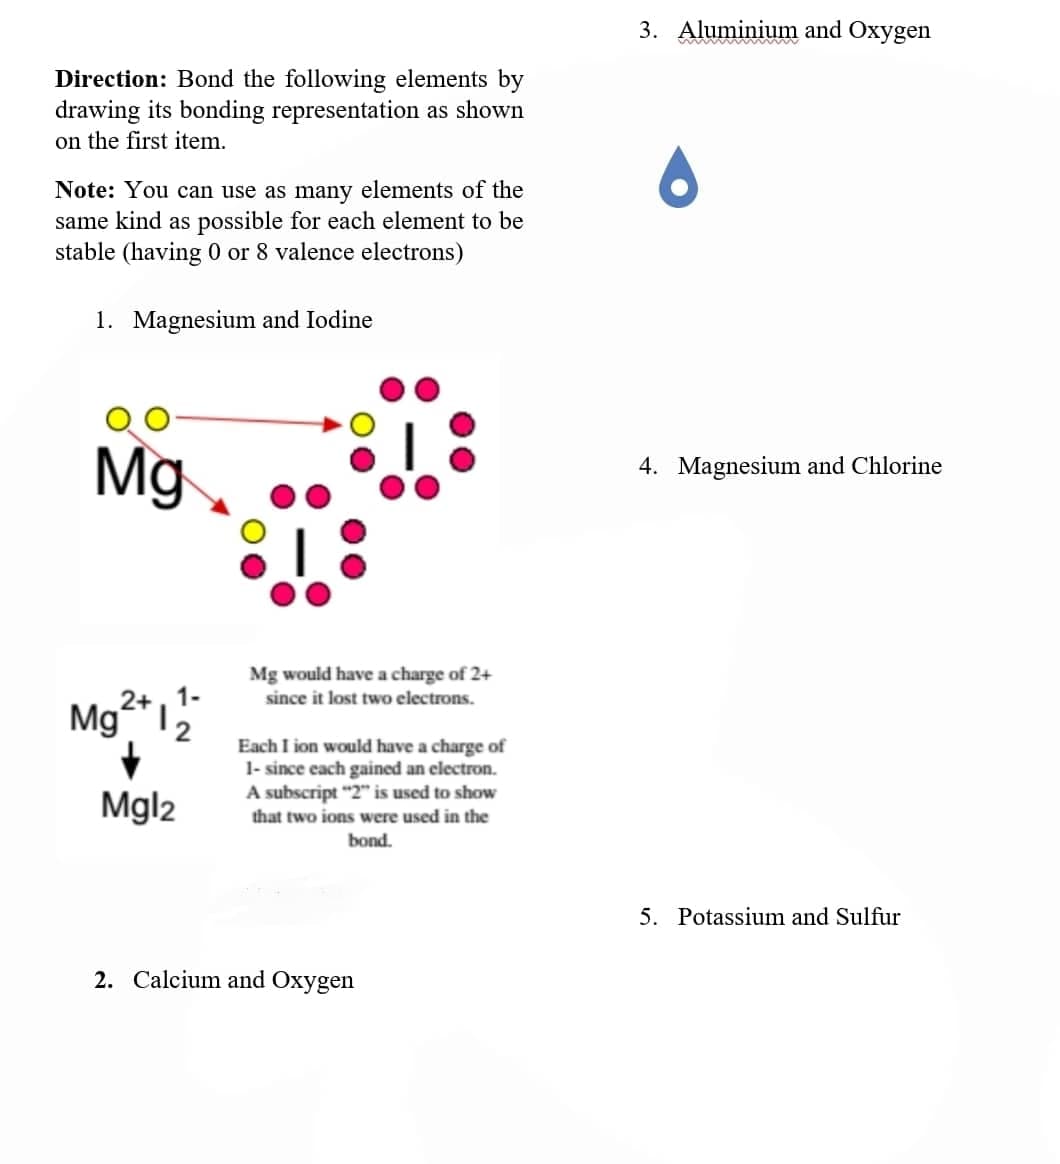 Direction: Bond the following elements by
drawing its bonding representation as shown
on the first item.
Note: You can use as many elements of the
same kind as possible for each element to be
stable (having 0 or 8 valence electrons)
1. Magnesium and Iodine
Mg
Mg
+
Mgl2
Mg would have a charge of 2+
since it lost two electrons.
Each I ion would have a charge of
1- since each gained an electron.
A subscript "2" is used to show
that two ions were used in the
bond.
2. Calcium and Oxygen
3. Aluminium and Oxygen
4. Magnesium and Chlorine
5. Potassium and Sulfur